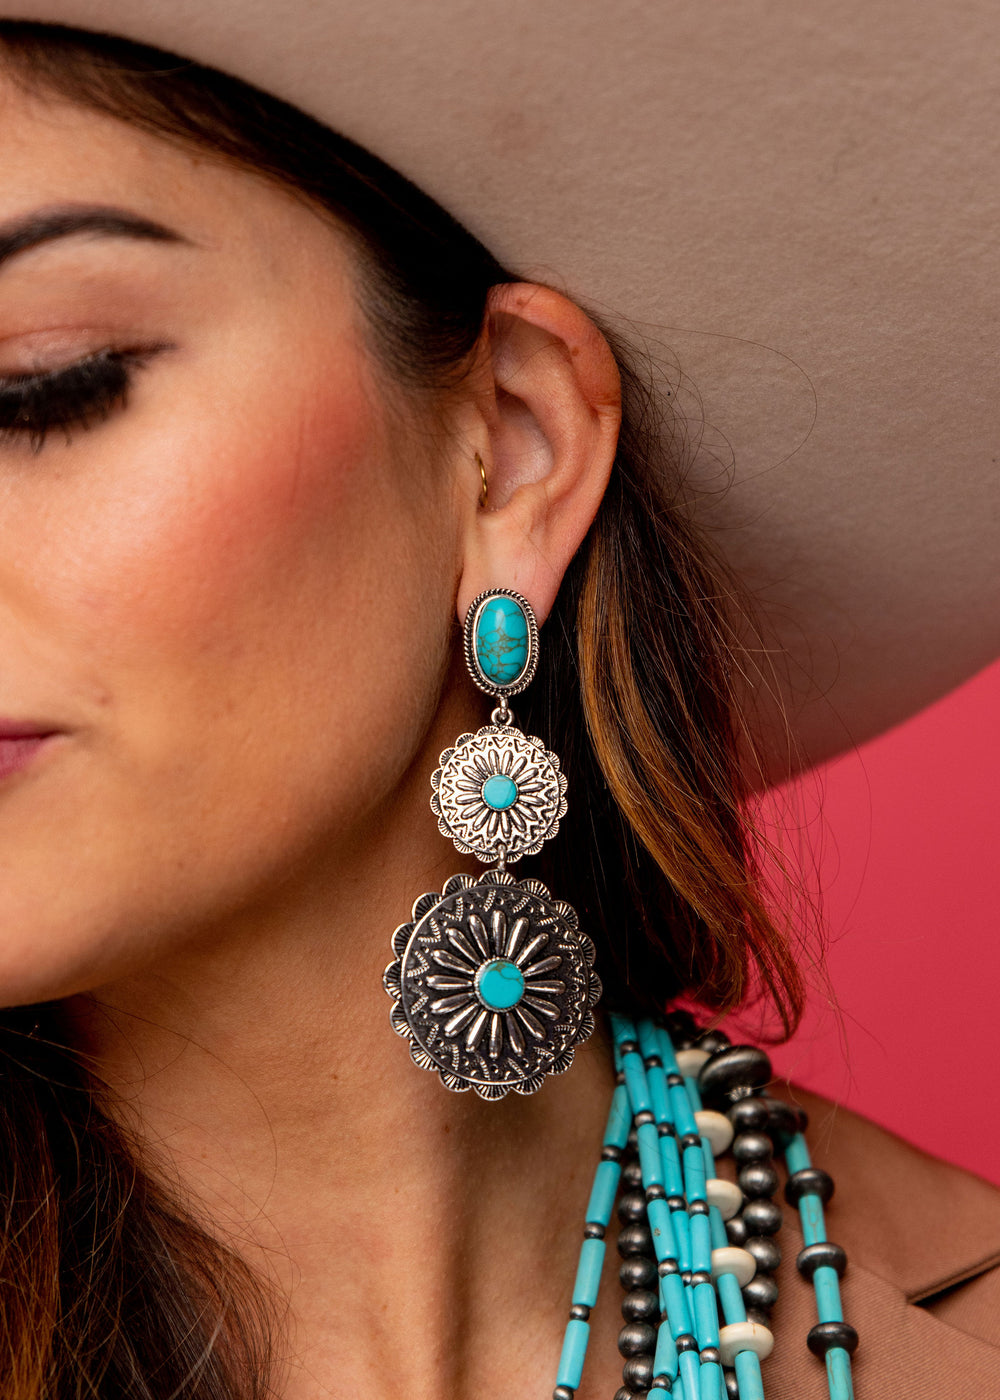 3.5" 3 Tier Burnished Silver and Turquoise Flower Concho Earrings on Turquoise Post